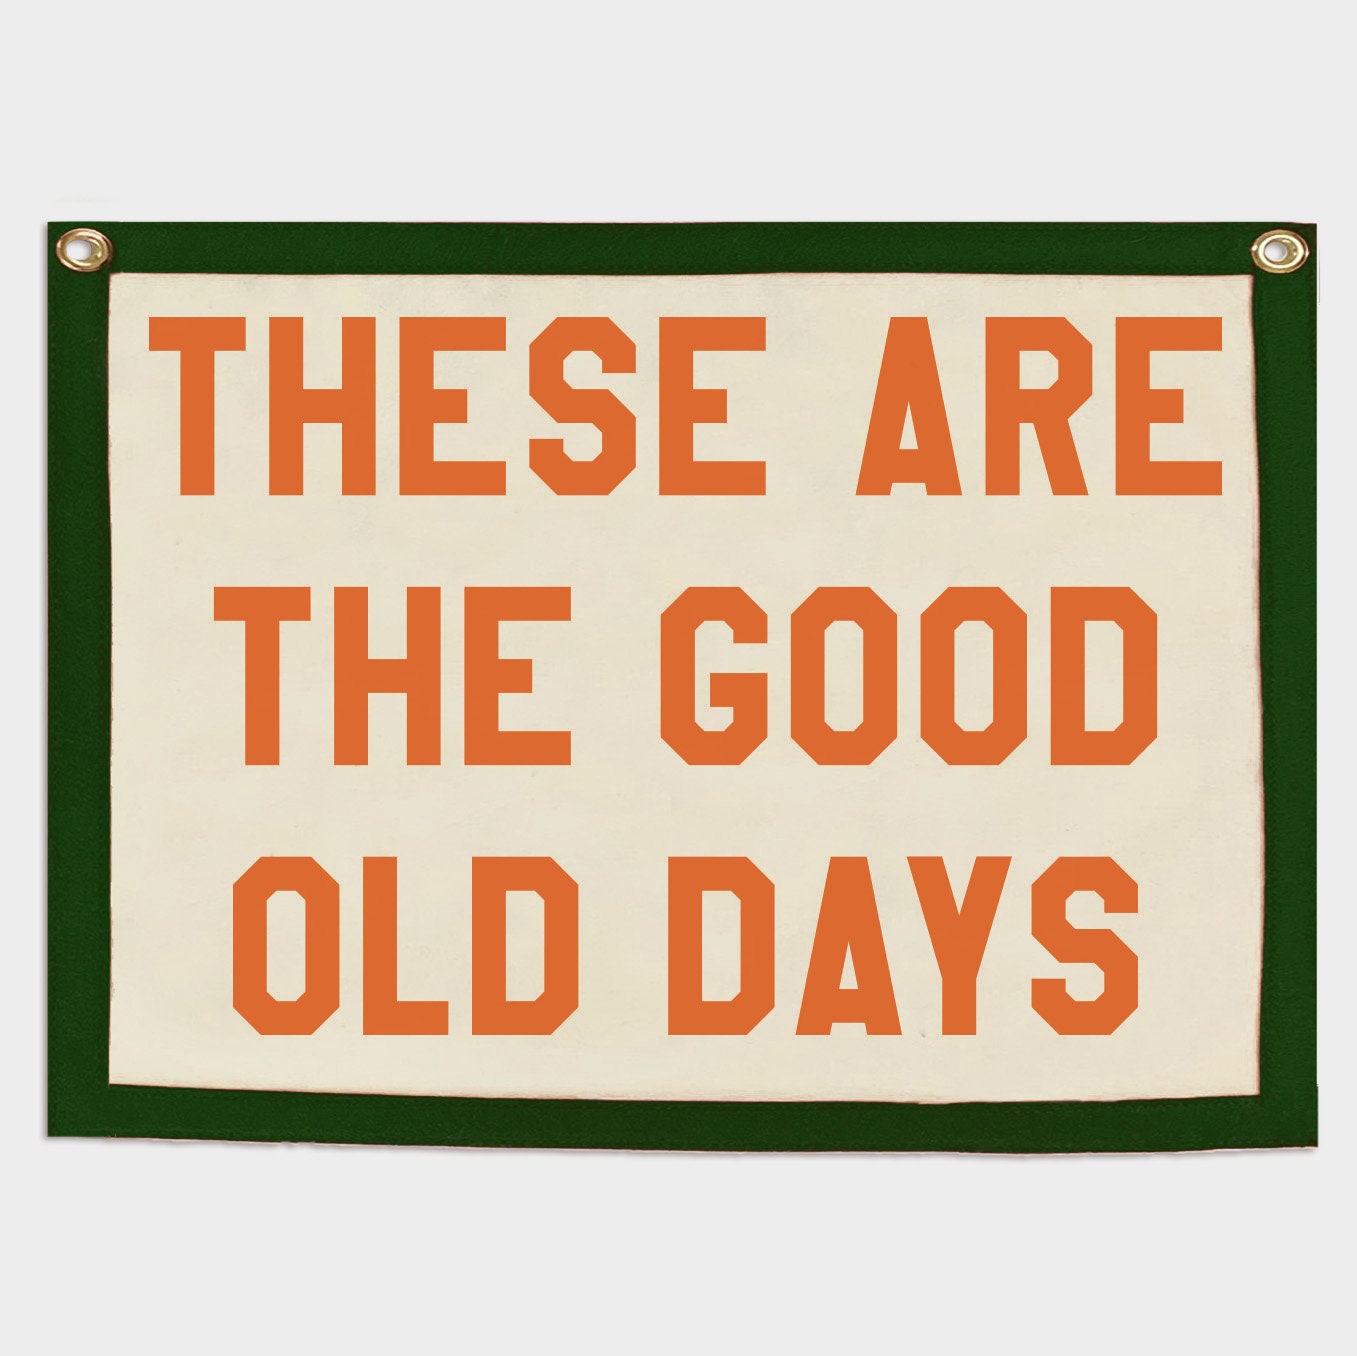 These are the good old days Banner Felt Pennant Flag Banner - Etsy 日本